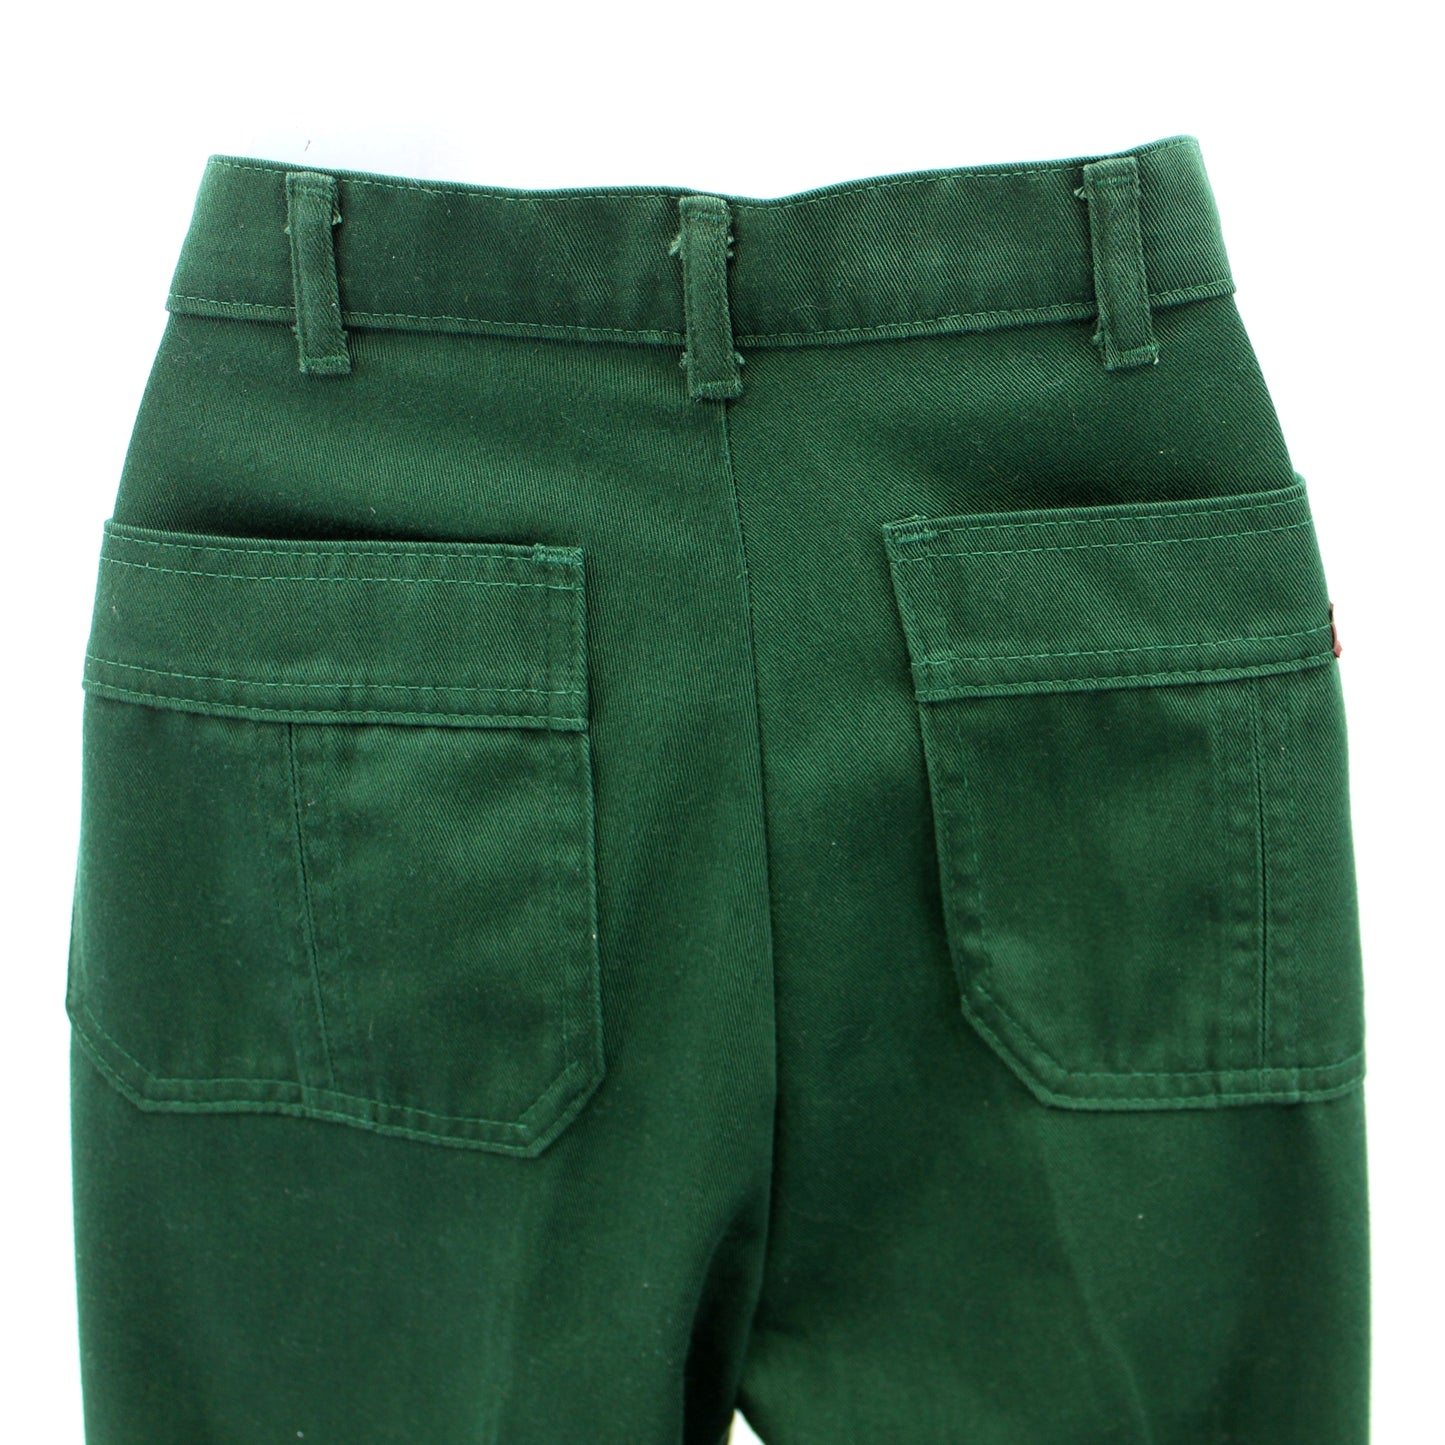 Early 1960s McGregor Womens Straight Hi Rise Mom's Pants Dark Green Twill Waist 29" double stitch trim used